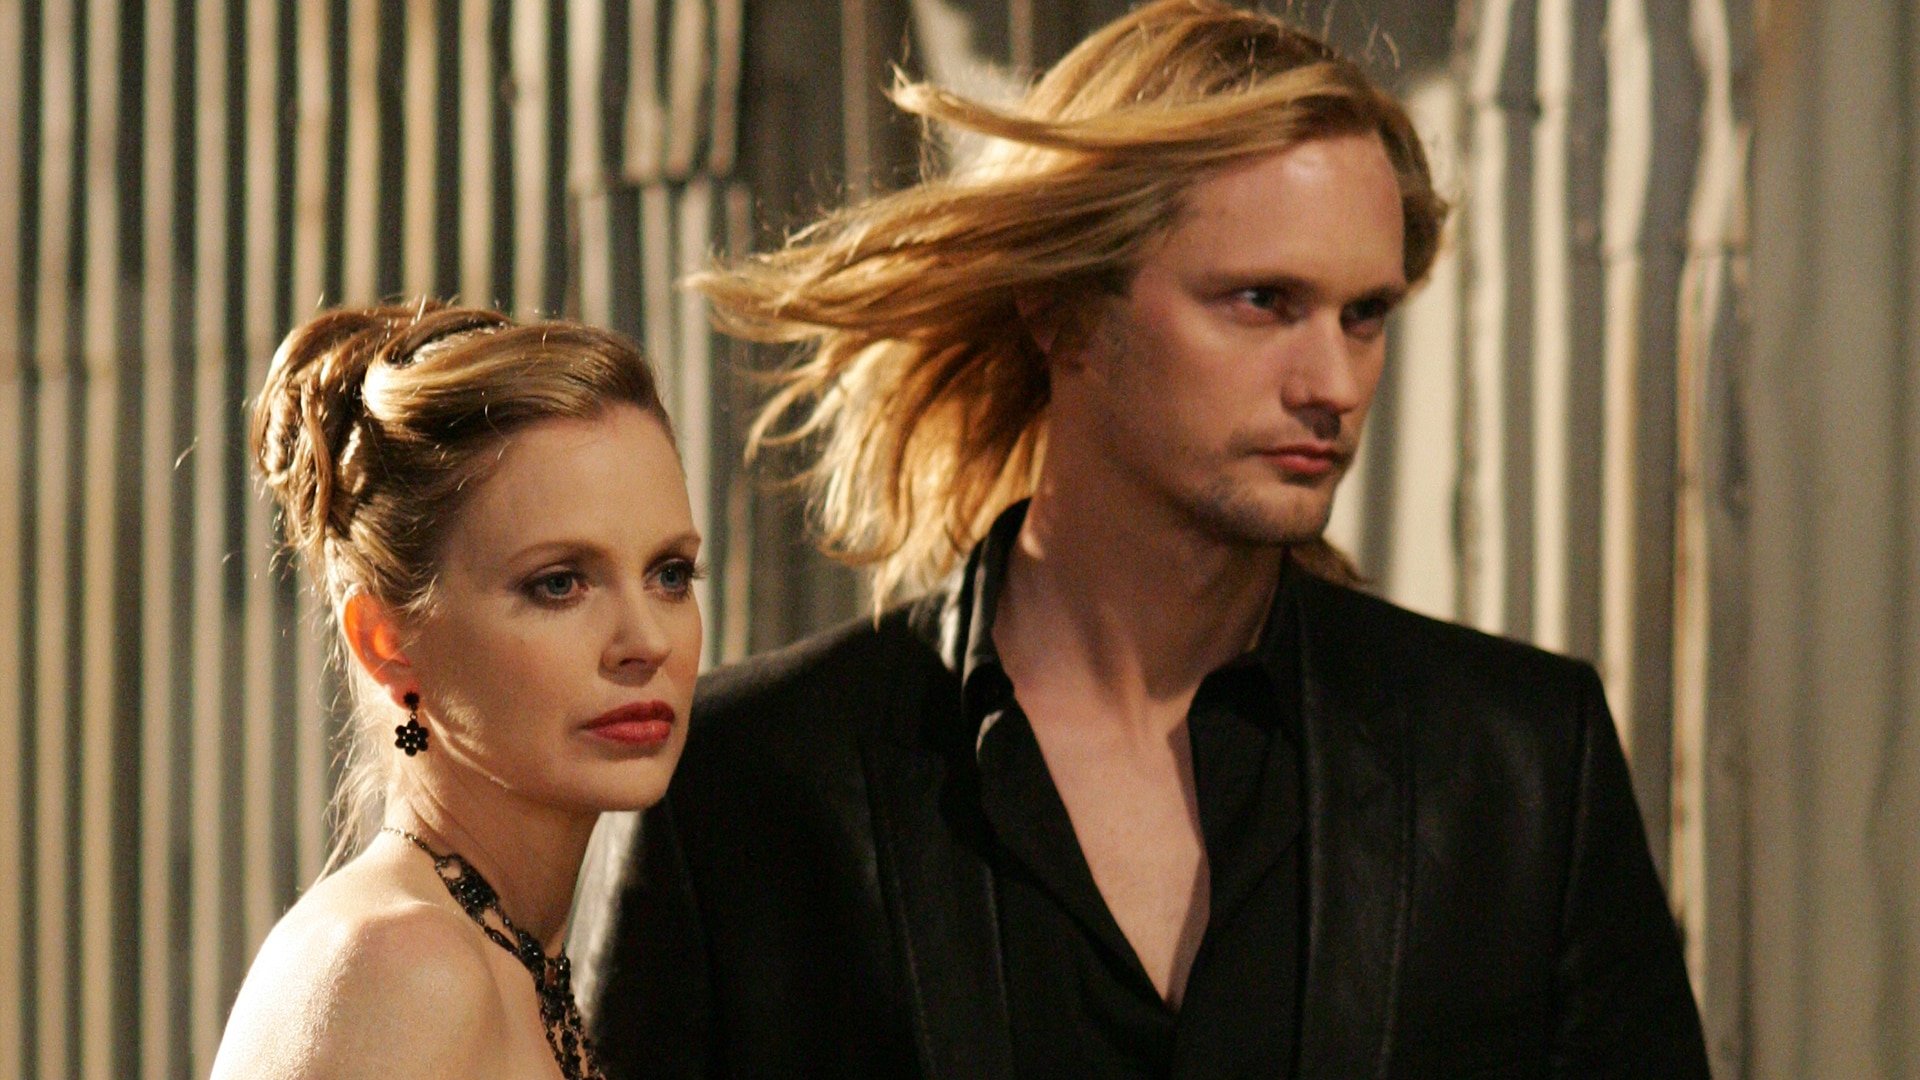 brion jackson recommends true blood season 1 streaming pic